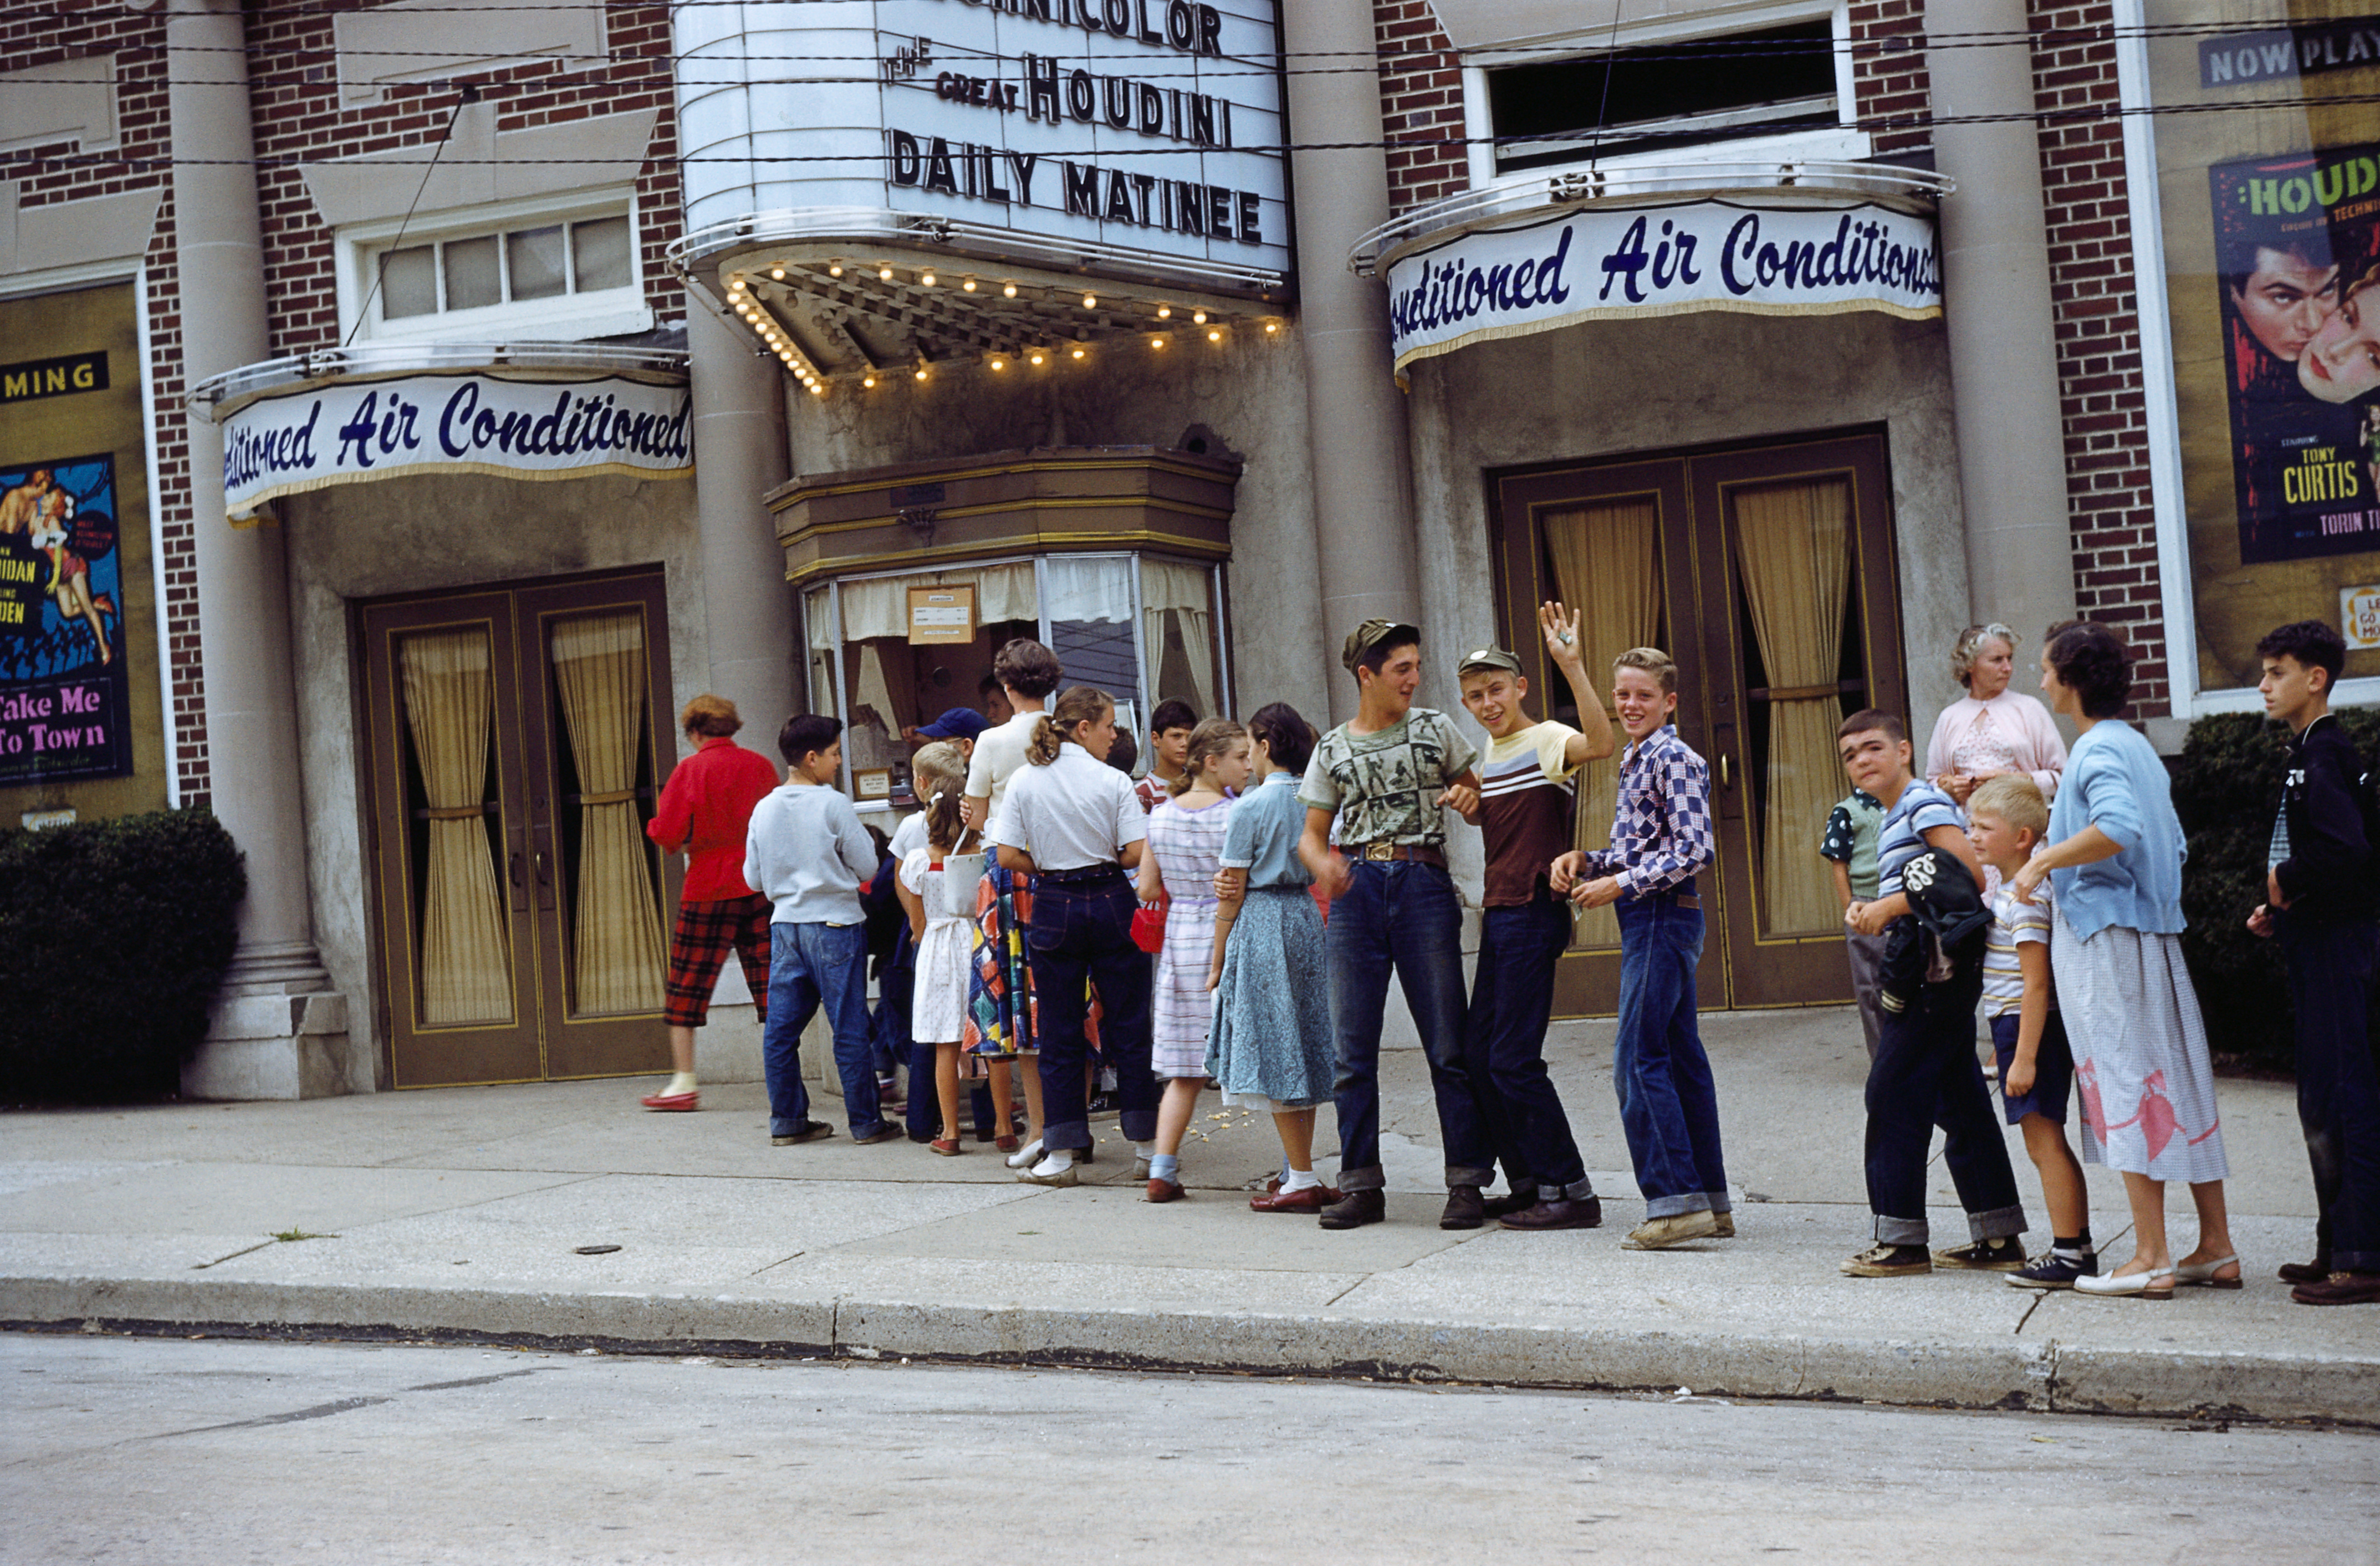 People in Line for Matinee